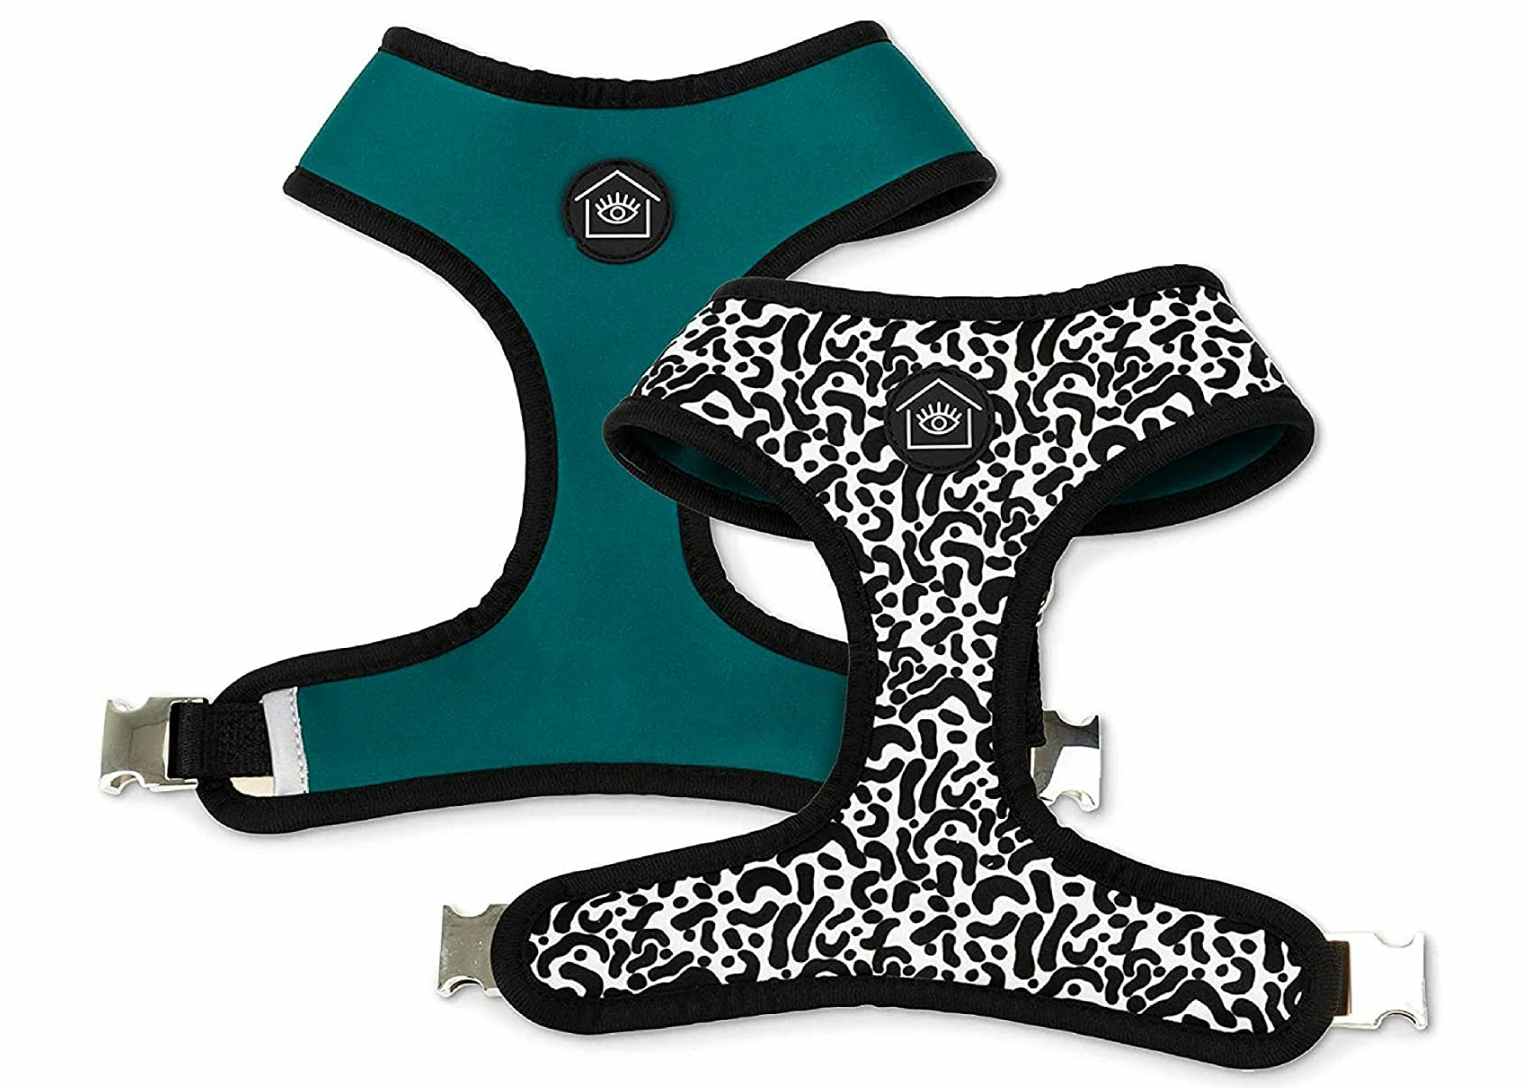 onathan Adler: Now House for Pets Reversible Harness